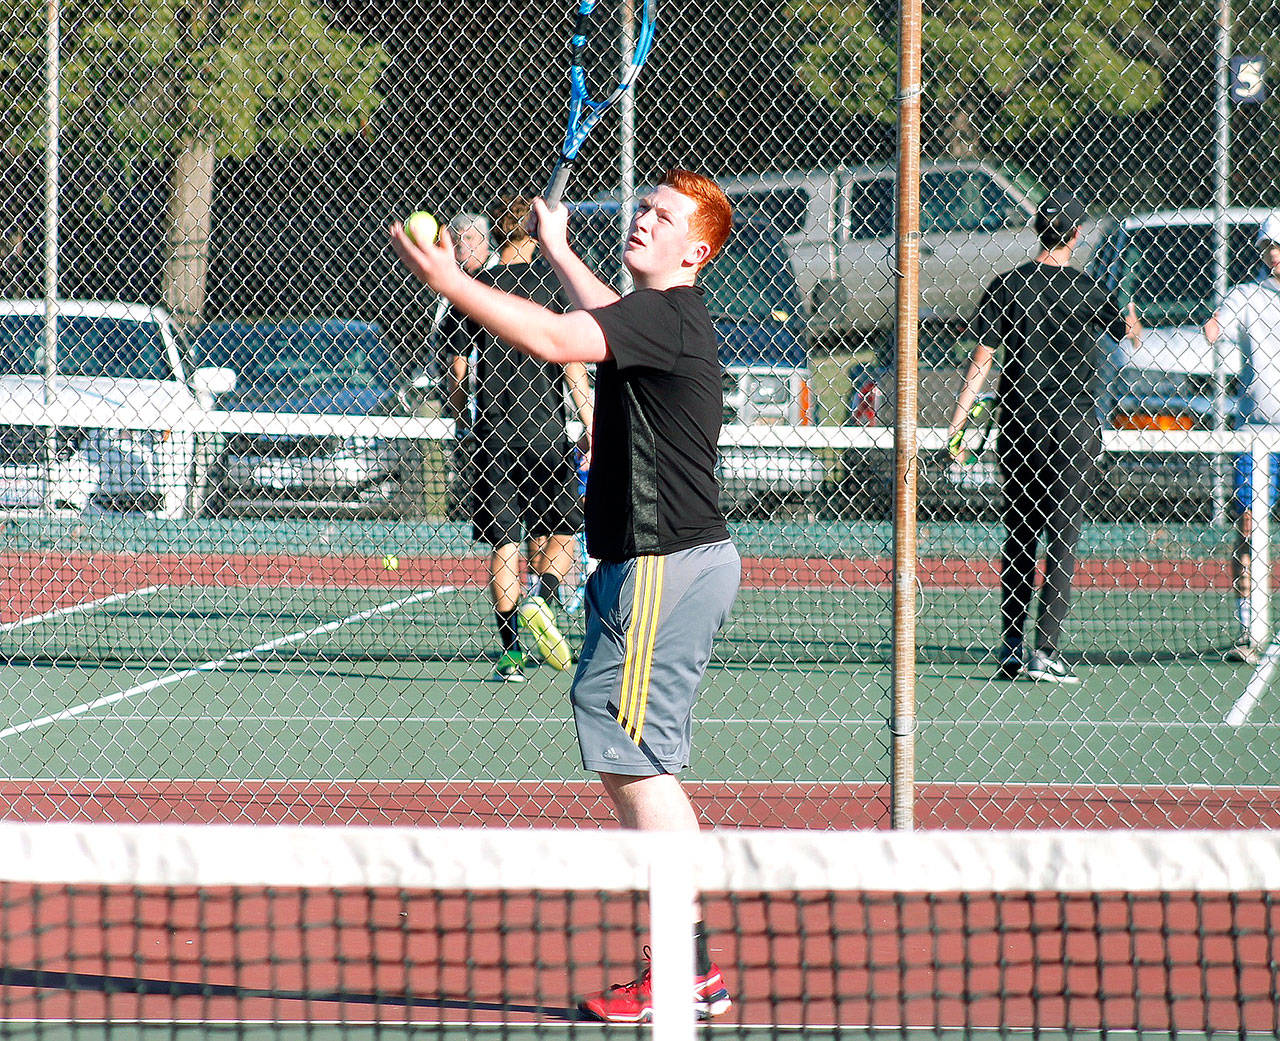 Tristan Schmid represented Kingston in the singles bracket at the Olympic League championships. (Mark Krulish/Kitsap News Group)